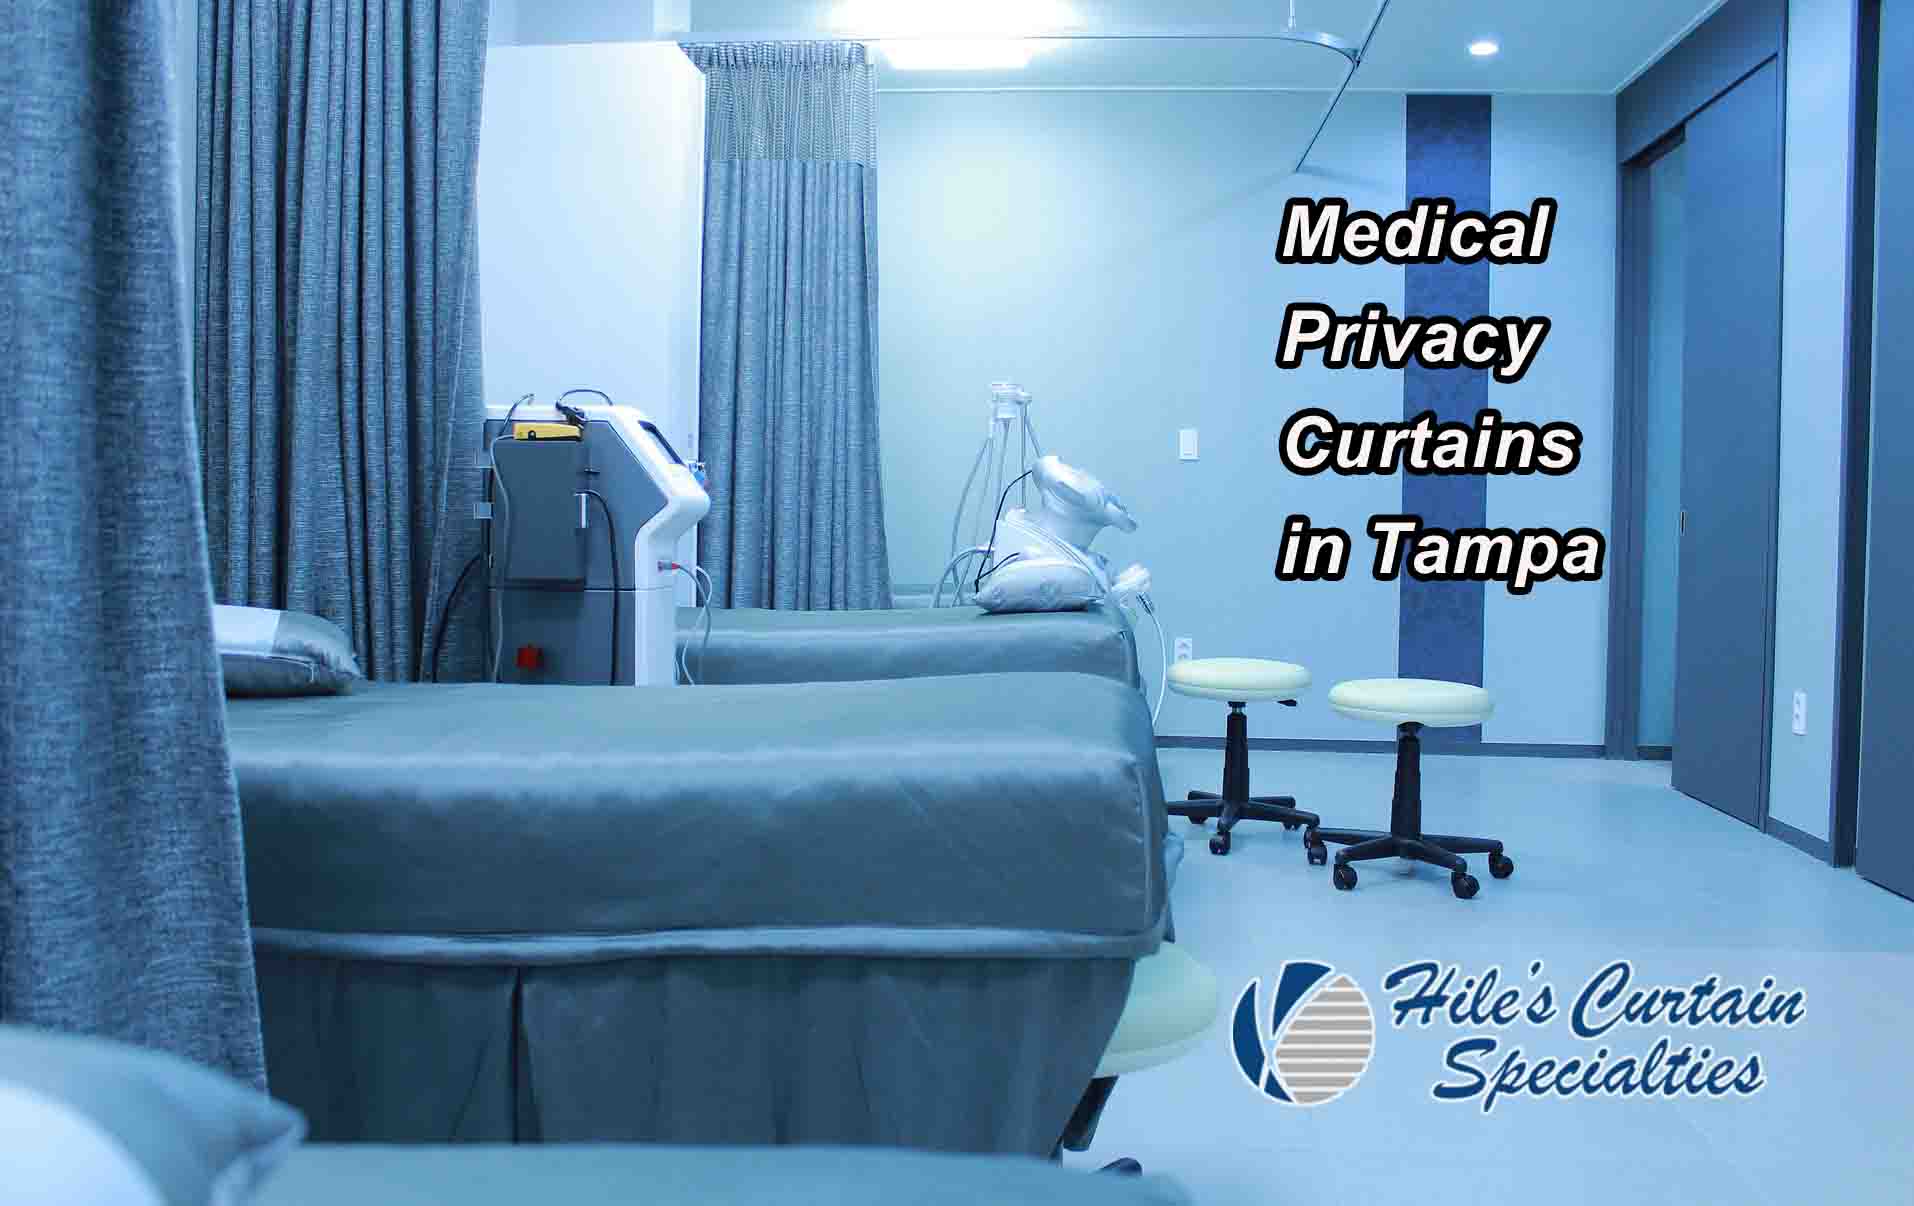 Medical Privacy Curtains - Tampa